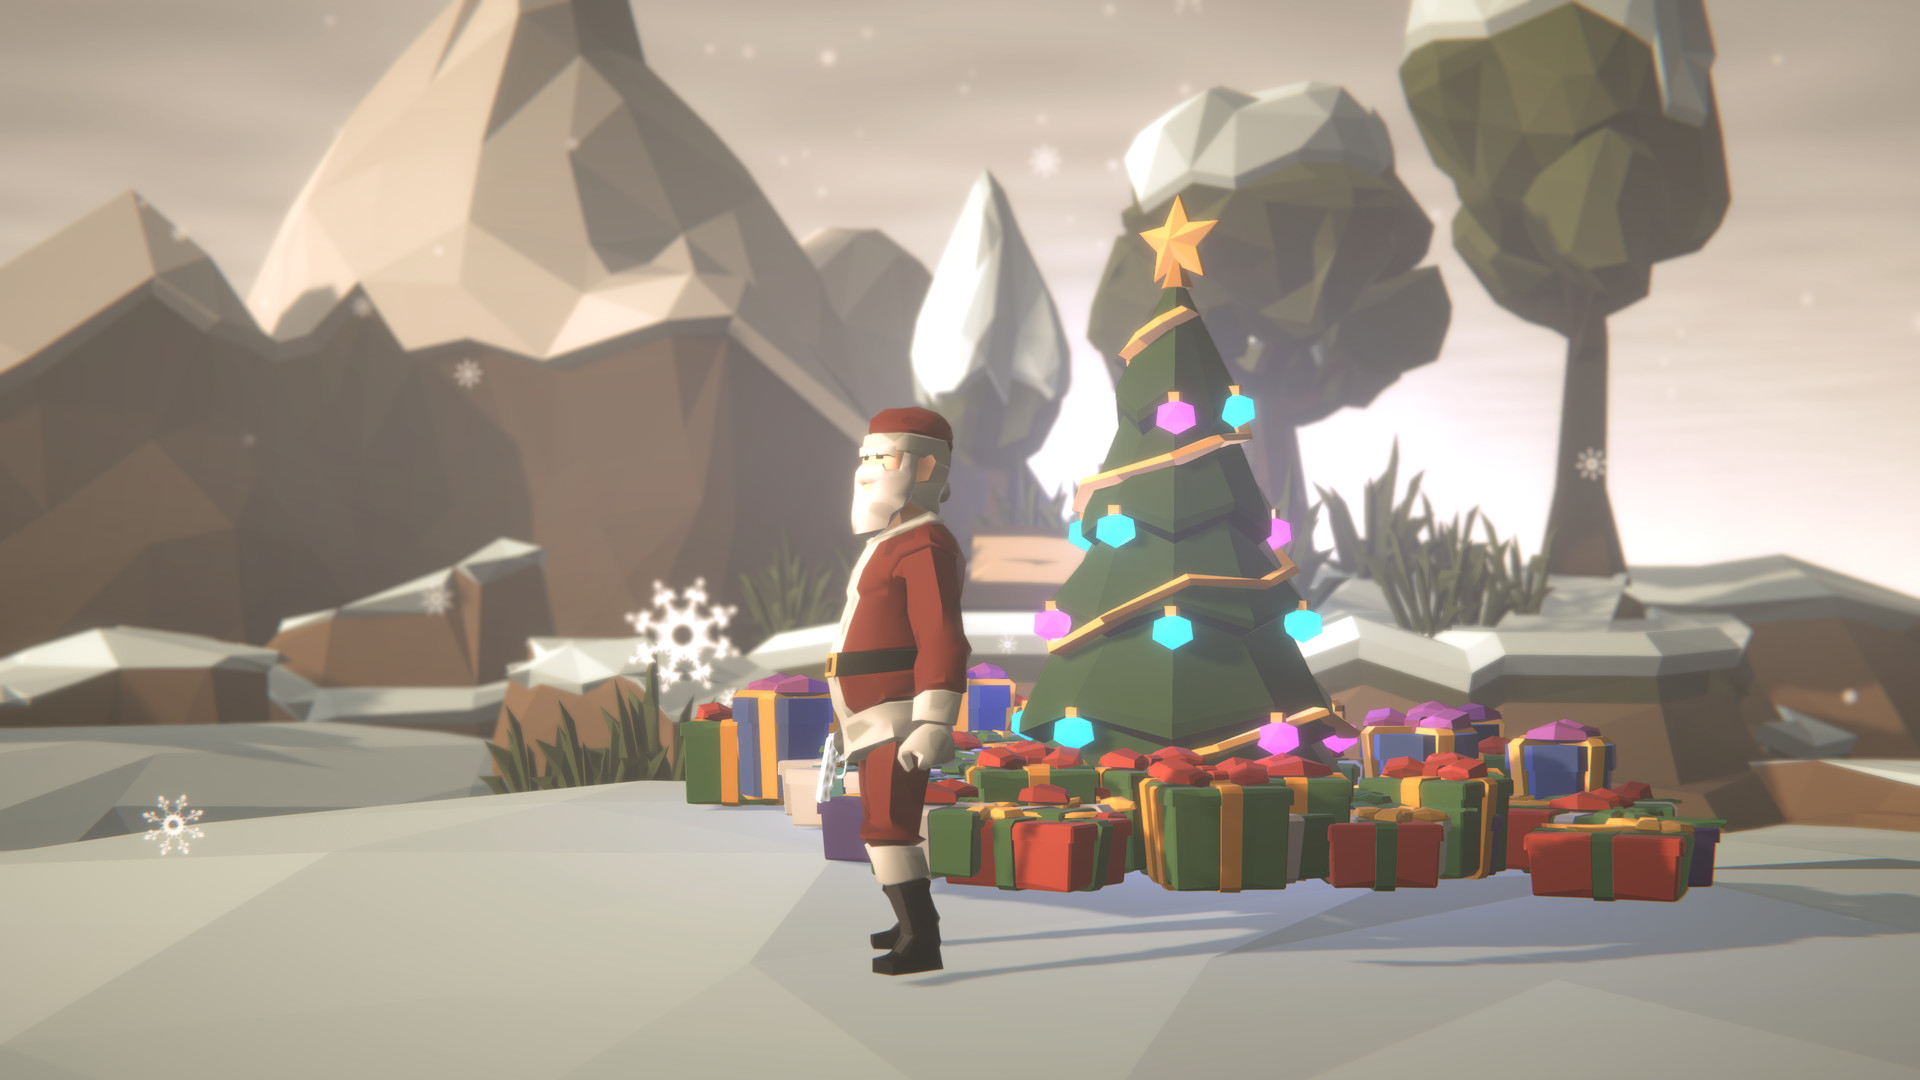 Santa Protects the Christmas Tree Free Download